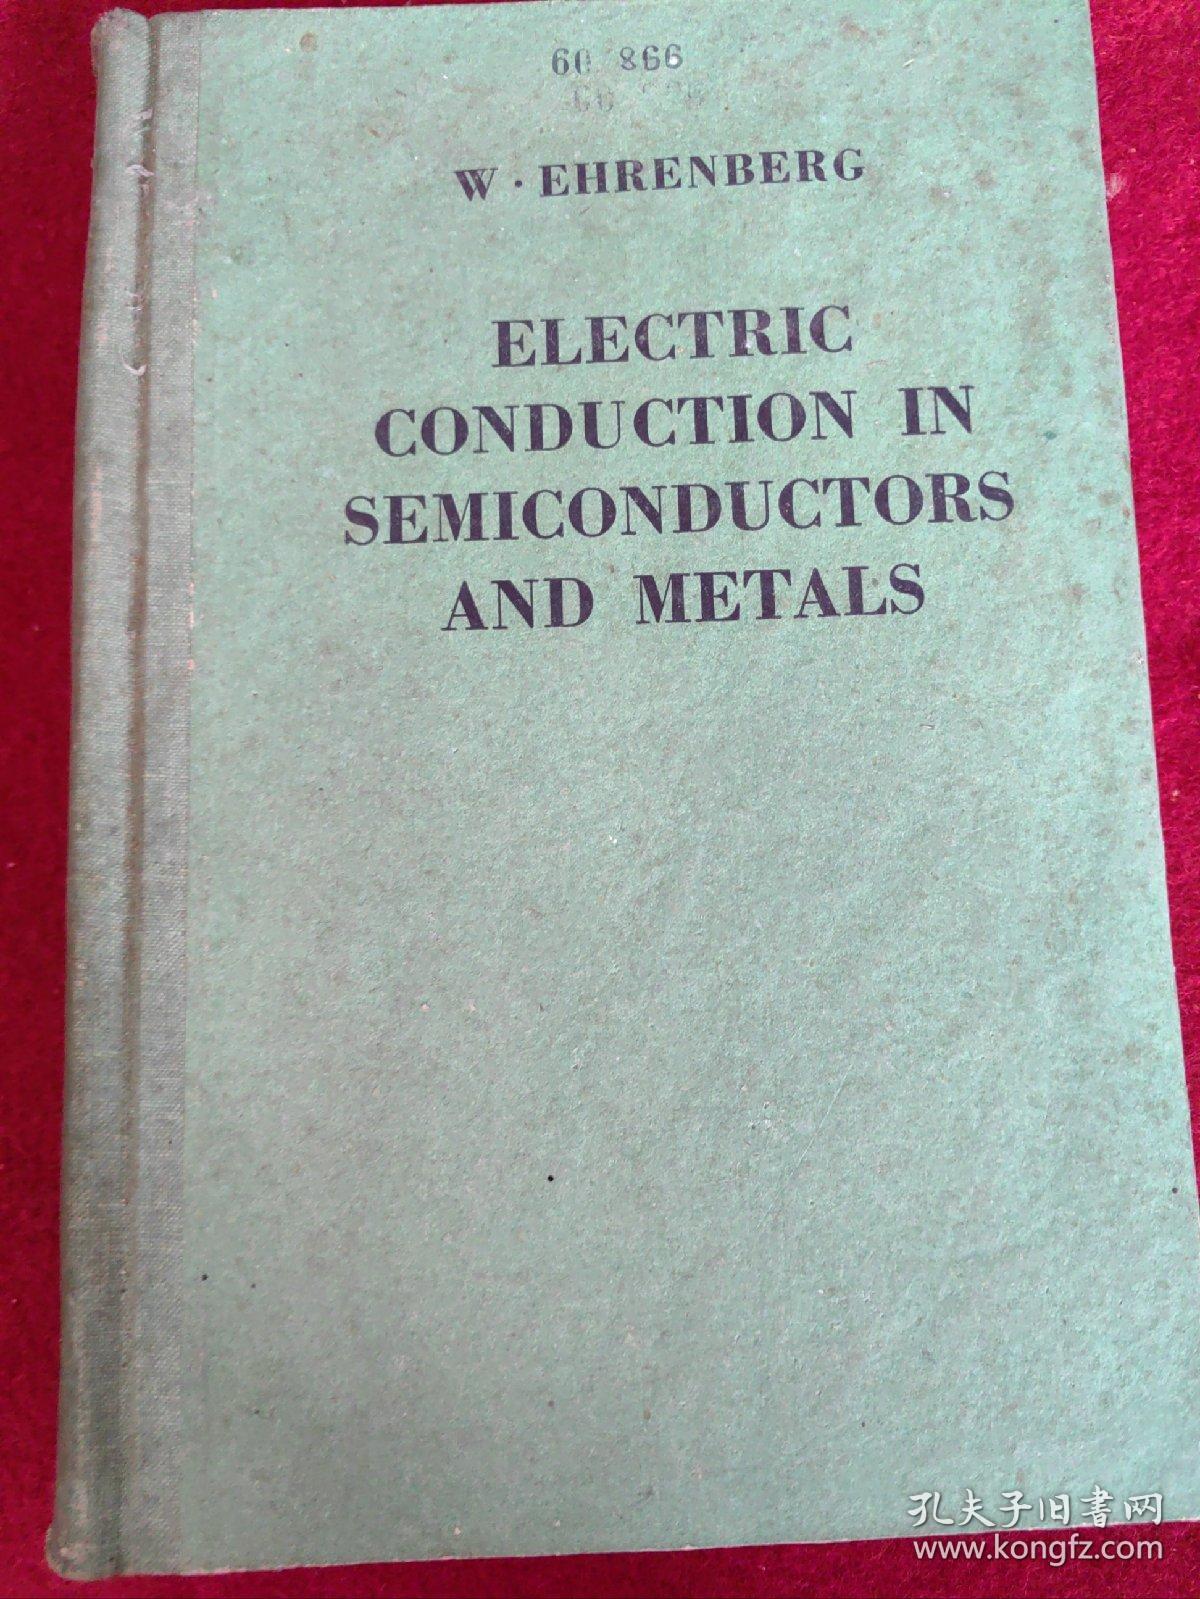 Electric Conduction in Semiconductors and Metals